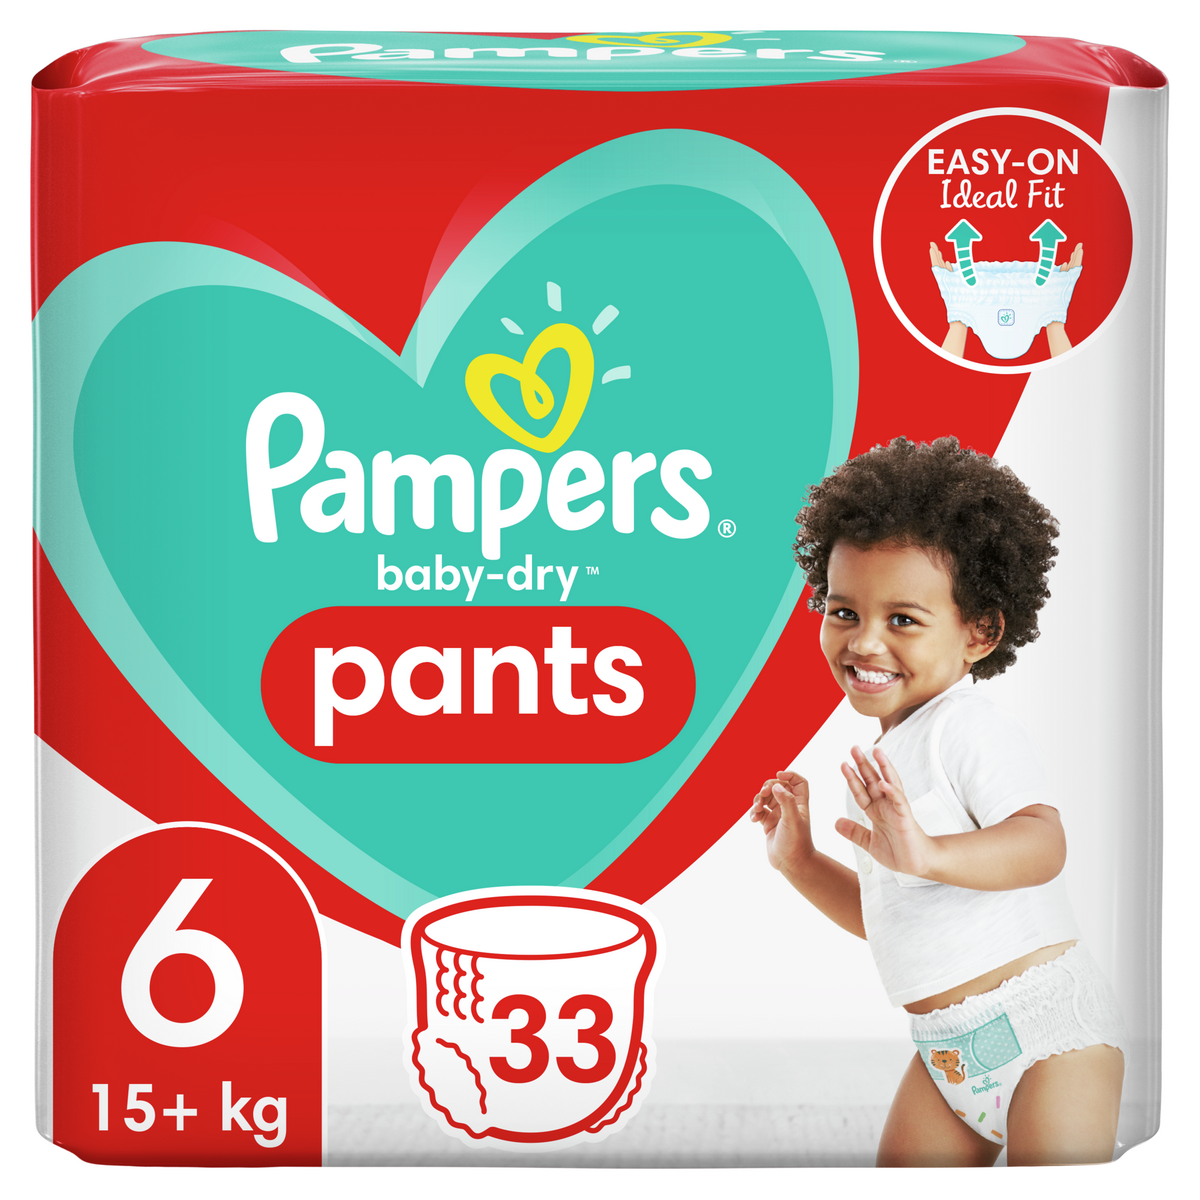 AUCHAN BABY Couches-culottes taille 6 +16kg 36 couches-culottes